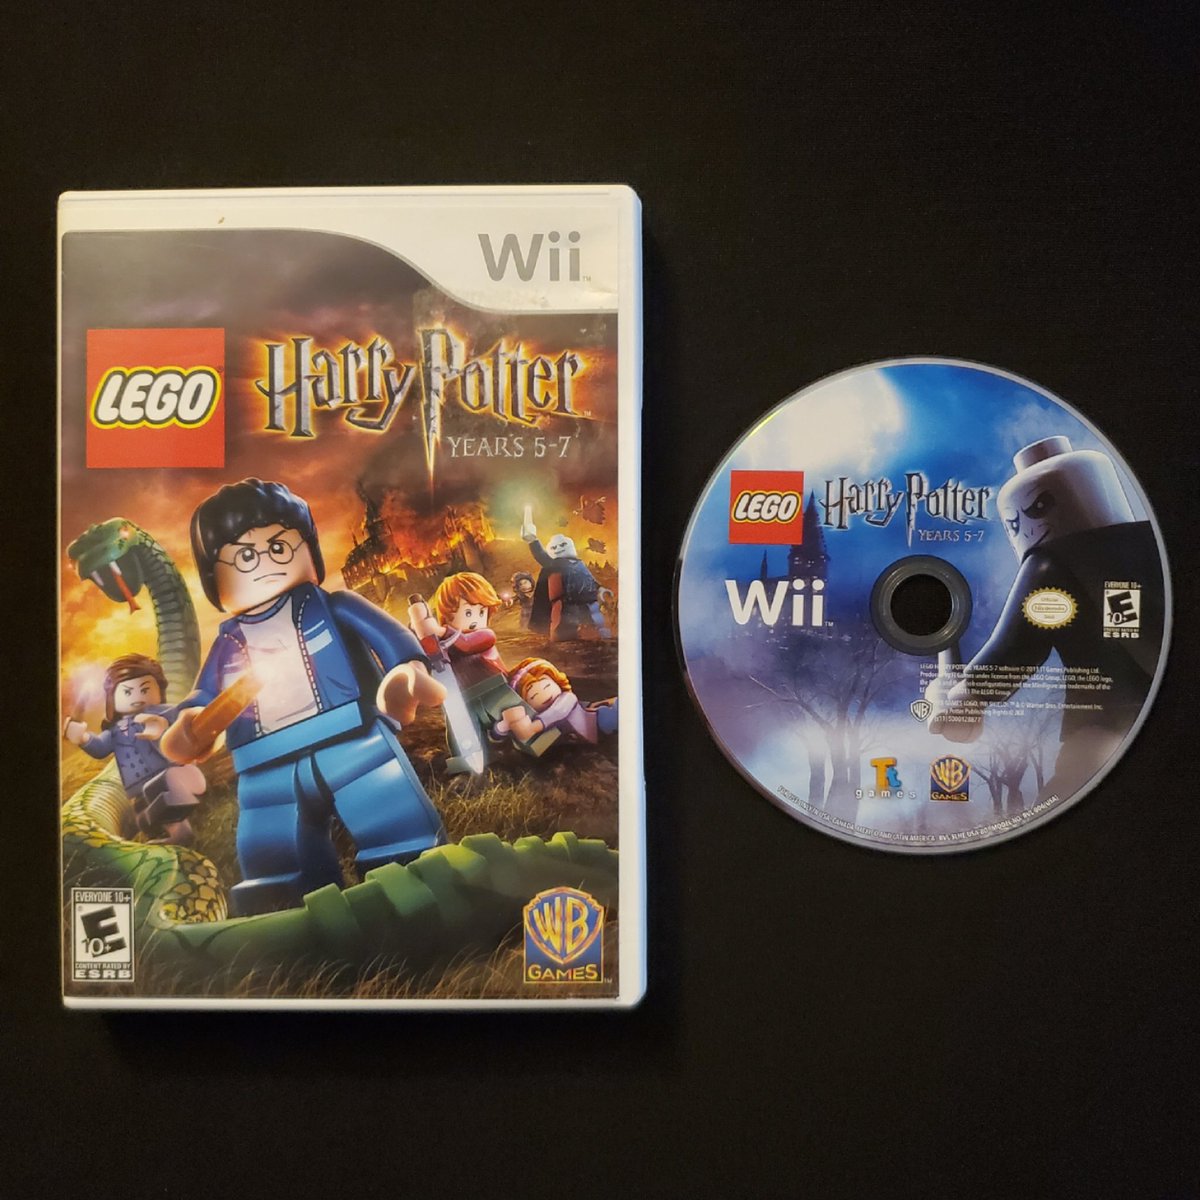 Day 7
LEGO Harry Potter
I've always loved the humor of the LEGO games. Combined with 7 Harry Potter stories *chef's kiss*
#motioncontrolmarch #Nintendo #nintendowiii #wii #legogames #harrypotter #legoharrypotter #wbgames #ronweasley #hermoinegranger #lordvoldemort